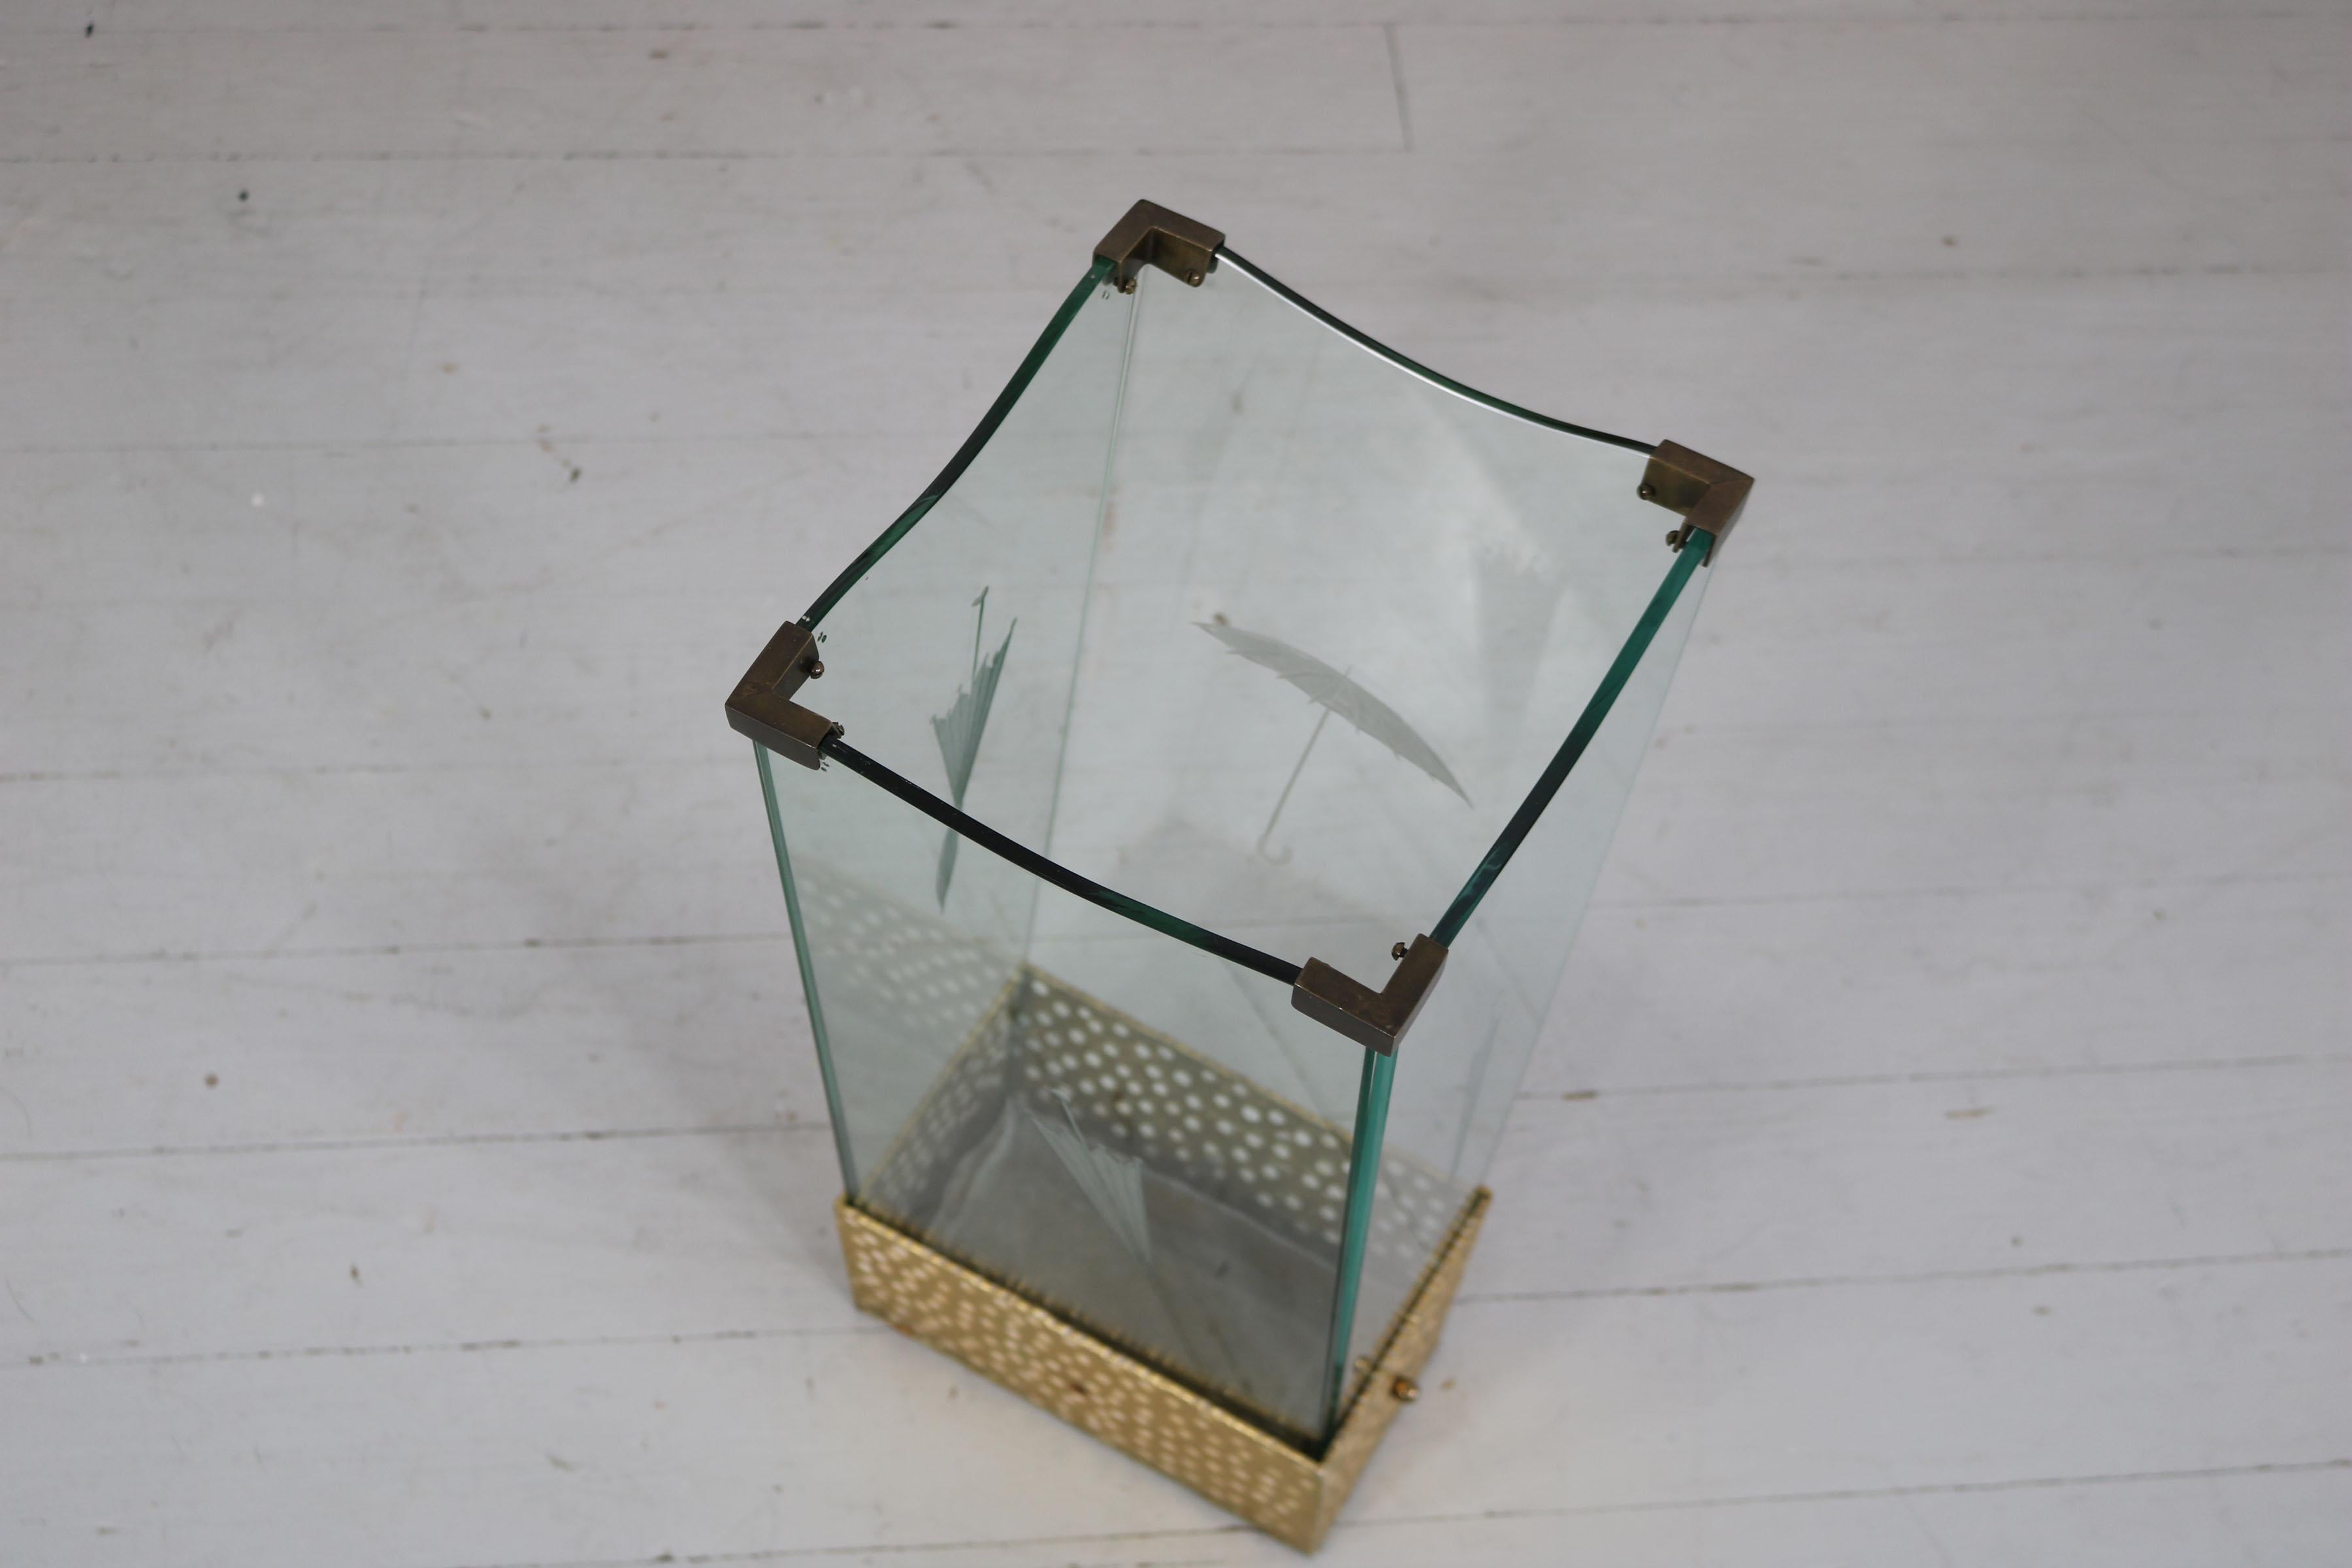 Umbrella stand made of etched glass and brass, attributed to Pier Luigi Colli.
The metal box on the underside can be pulled out to empty the water. 